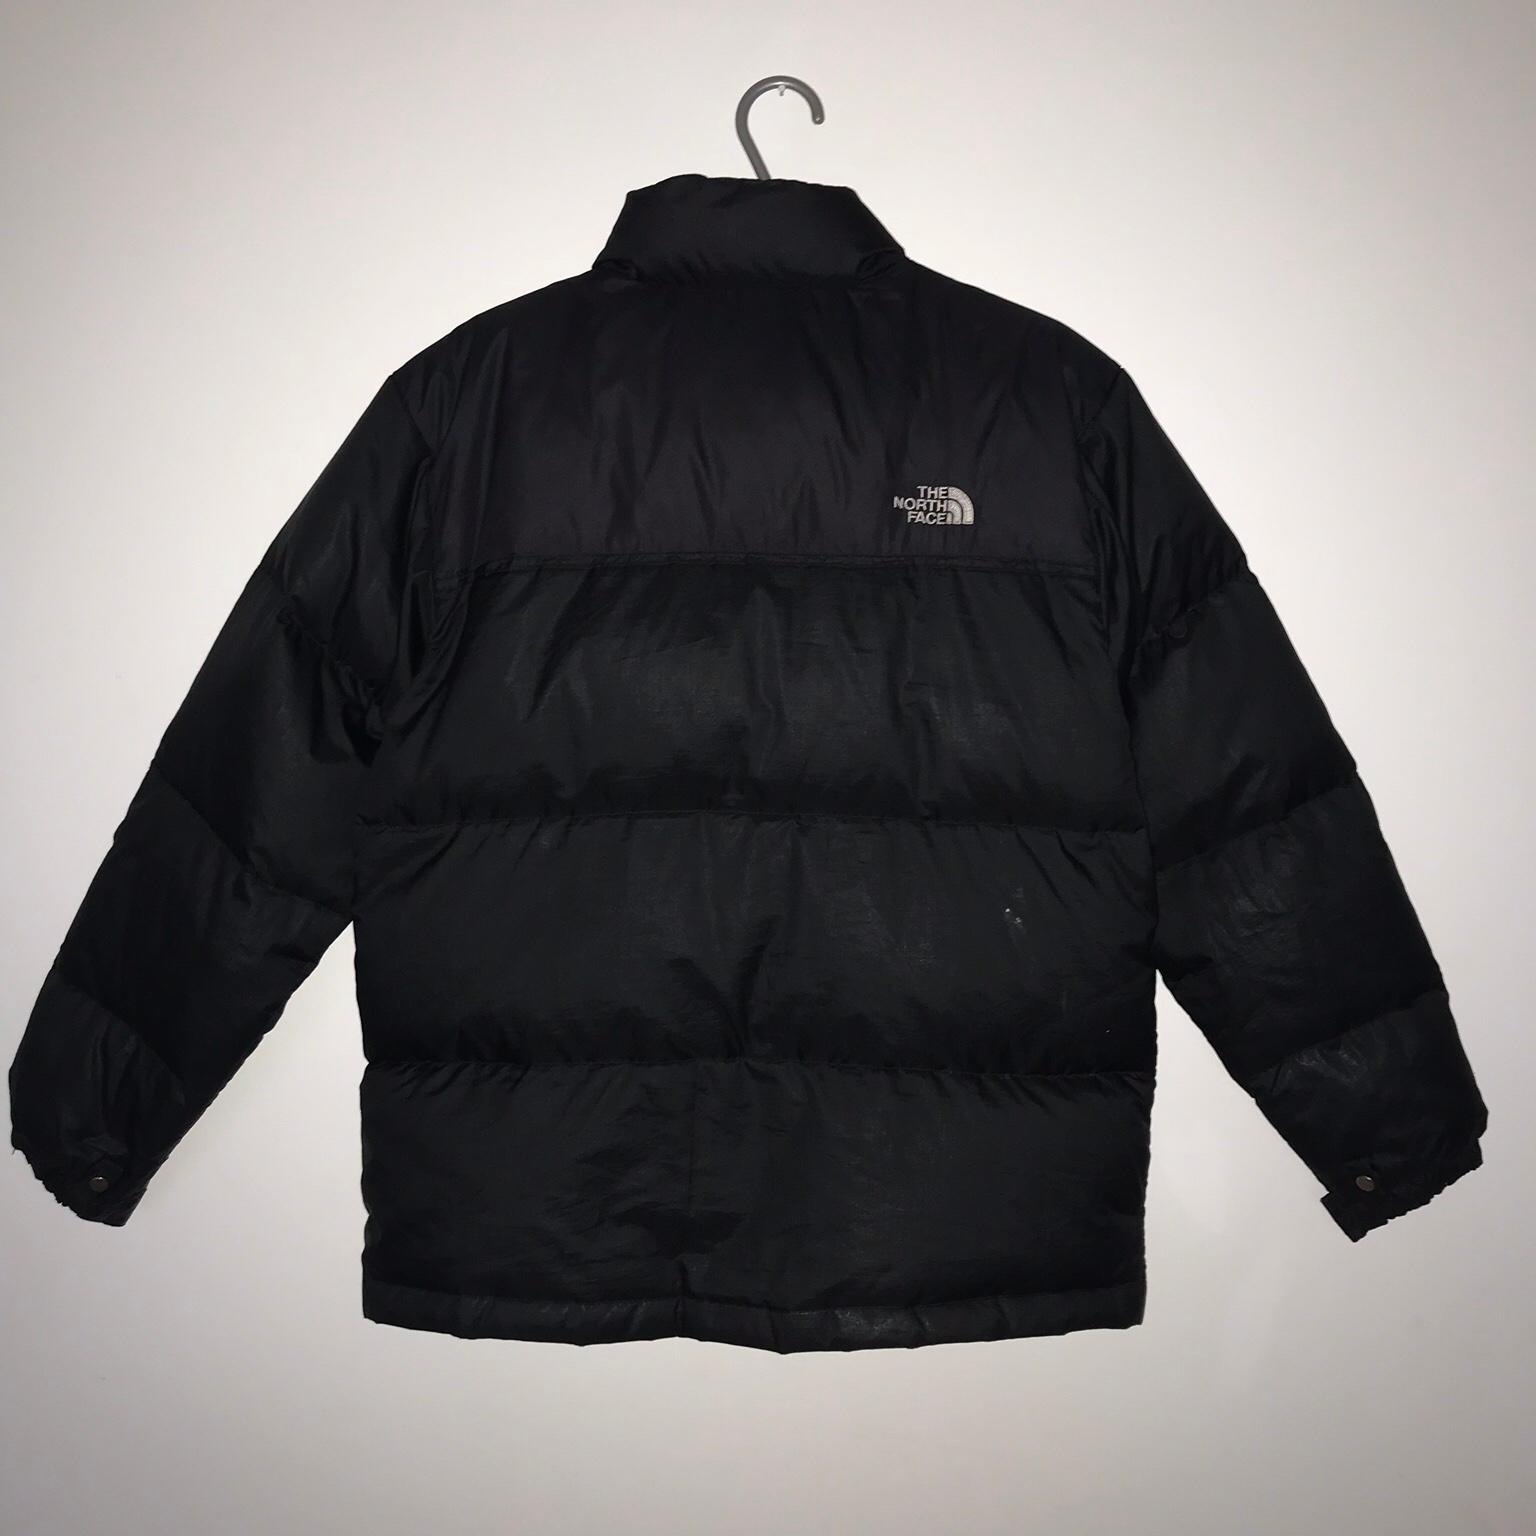 north face 550 puffer jacket